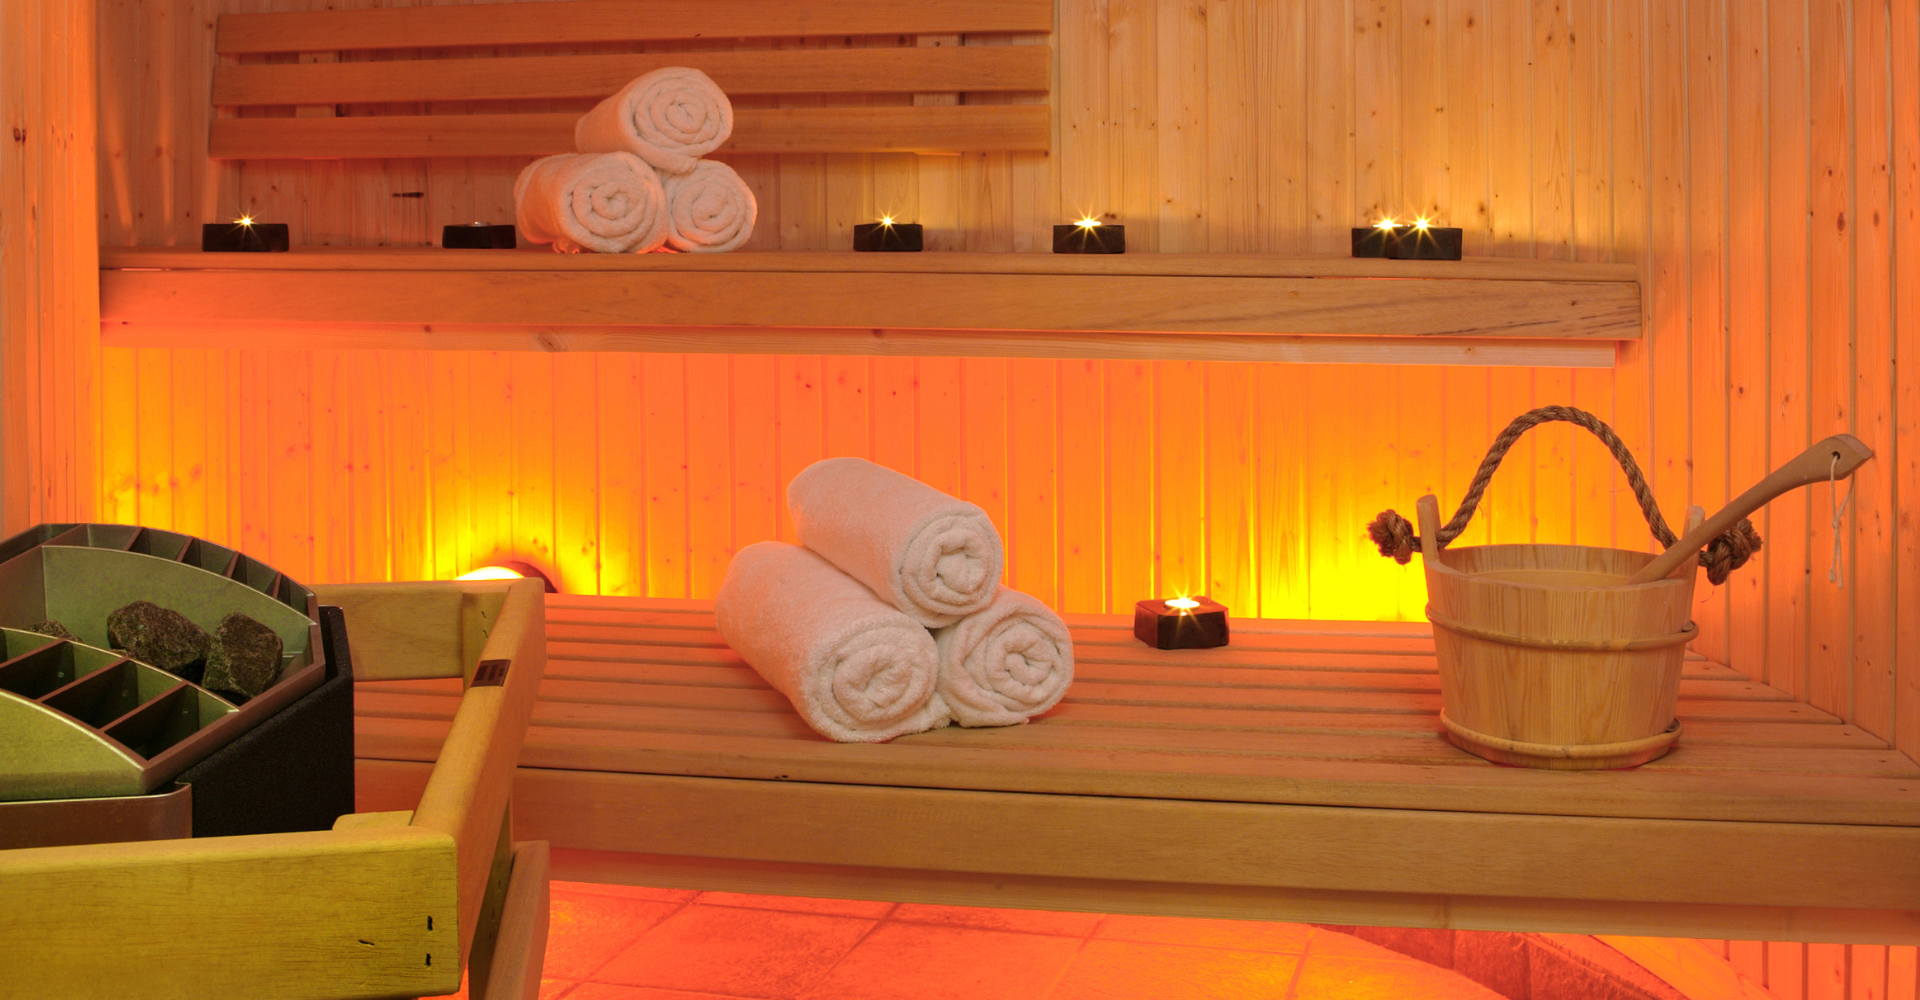 Sauna or Steam Room for Skin Benefits: Which One is Better?